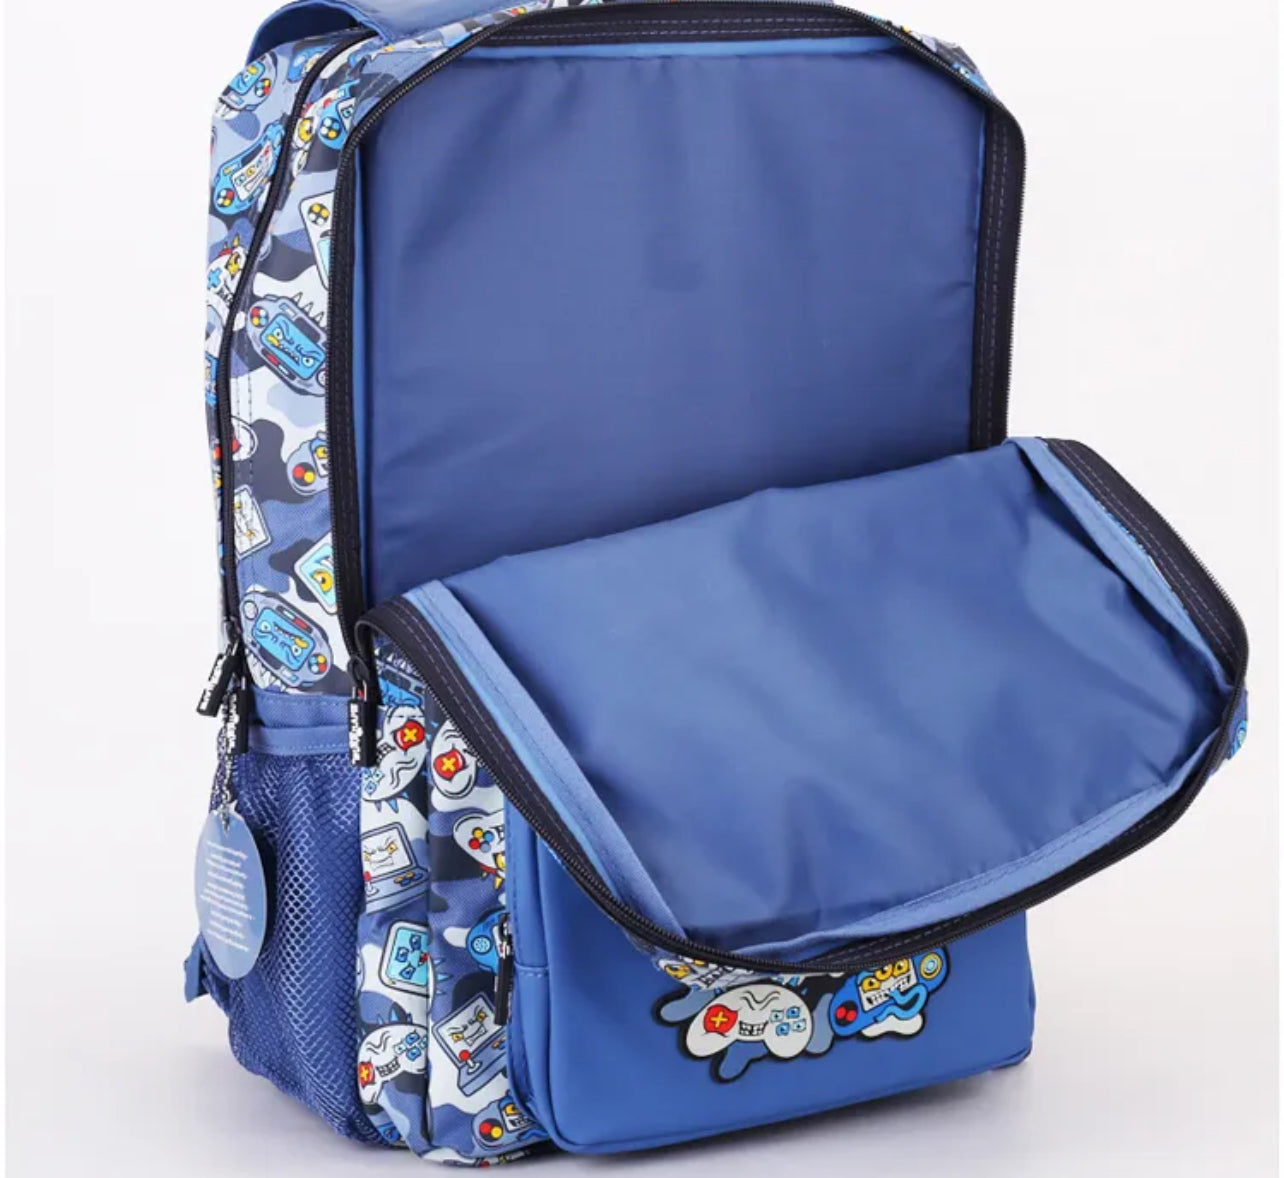 Buy NEW Smiggle Girls School Backpack And More at Ubuy India